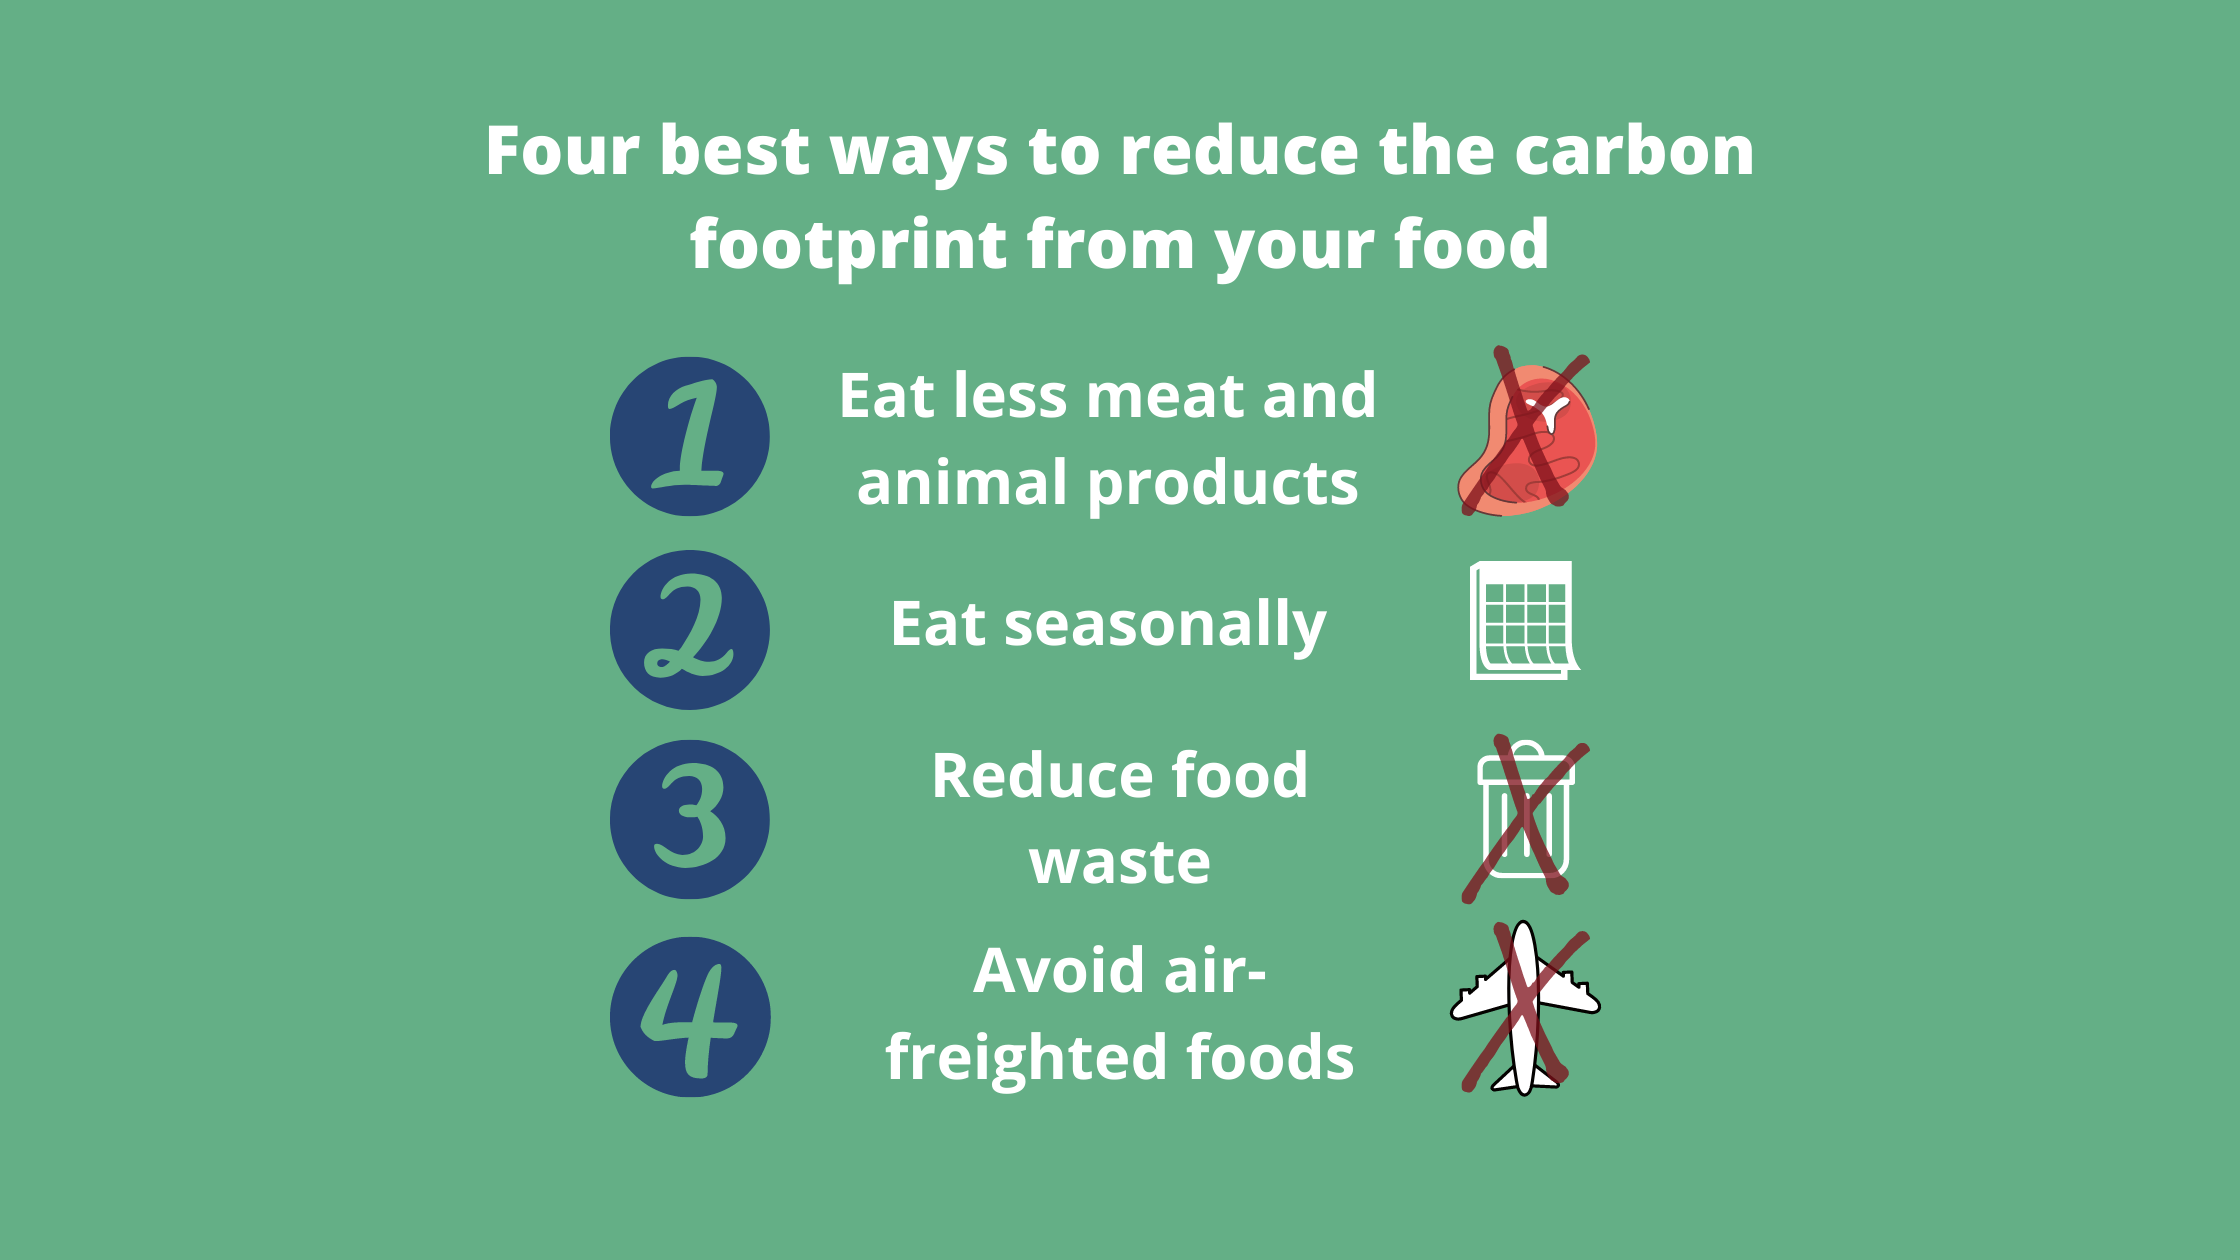 How to reduce the carbon footprint from your food - My Emissions